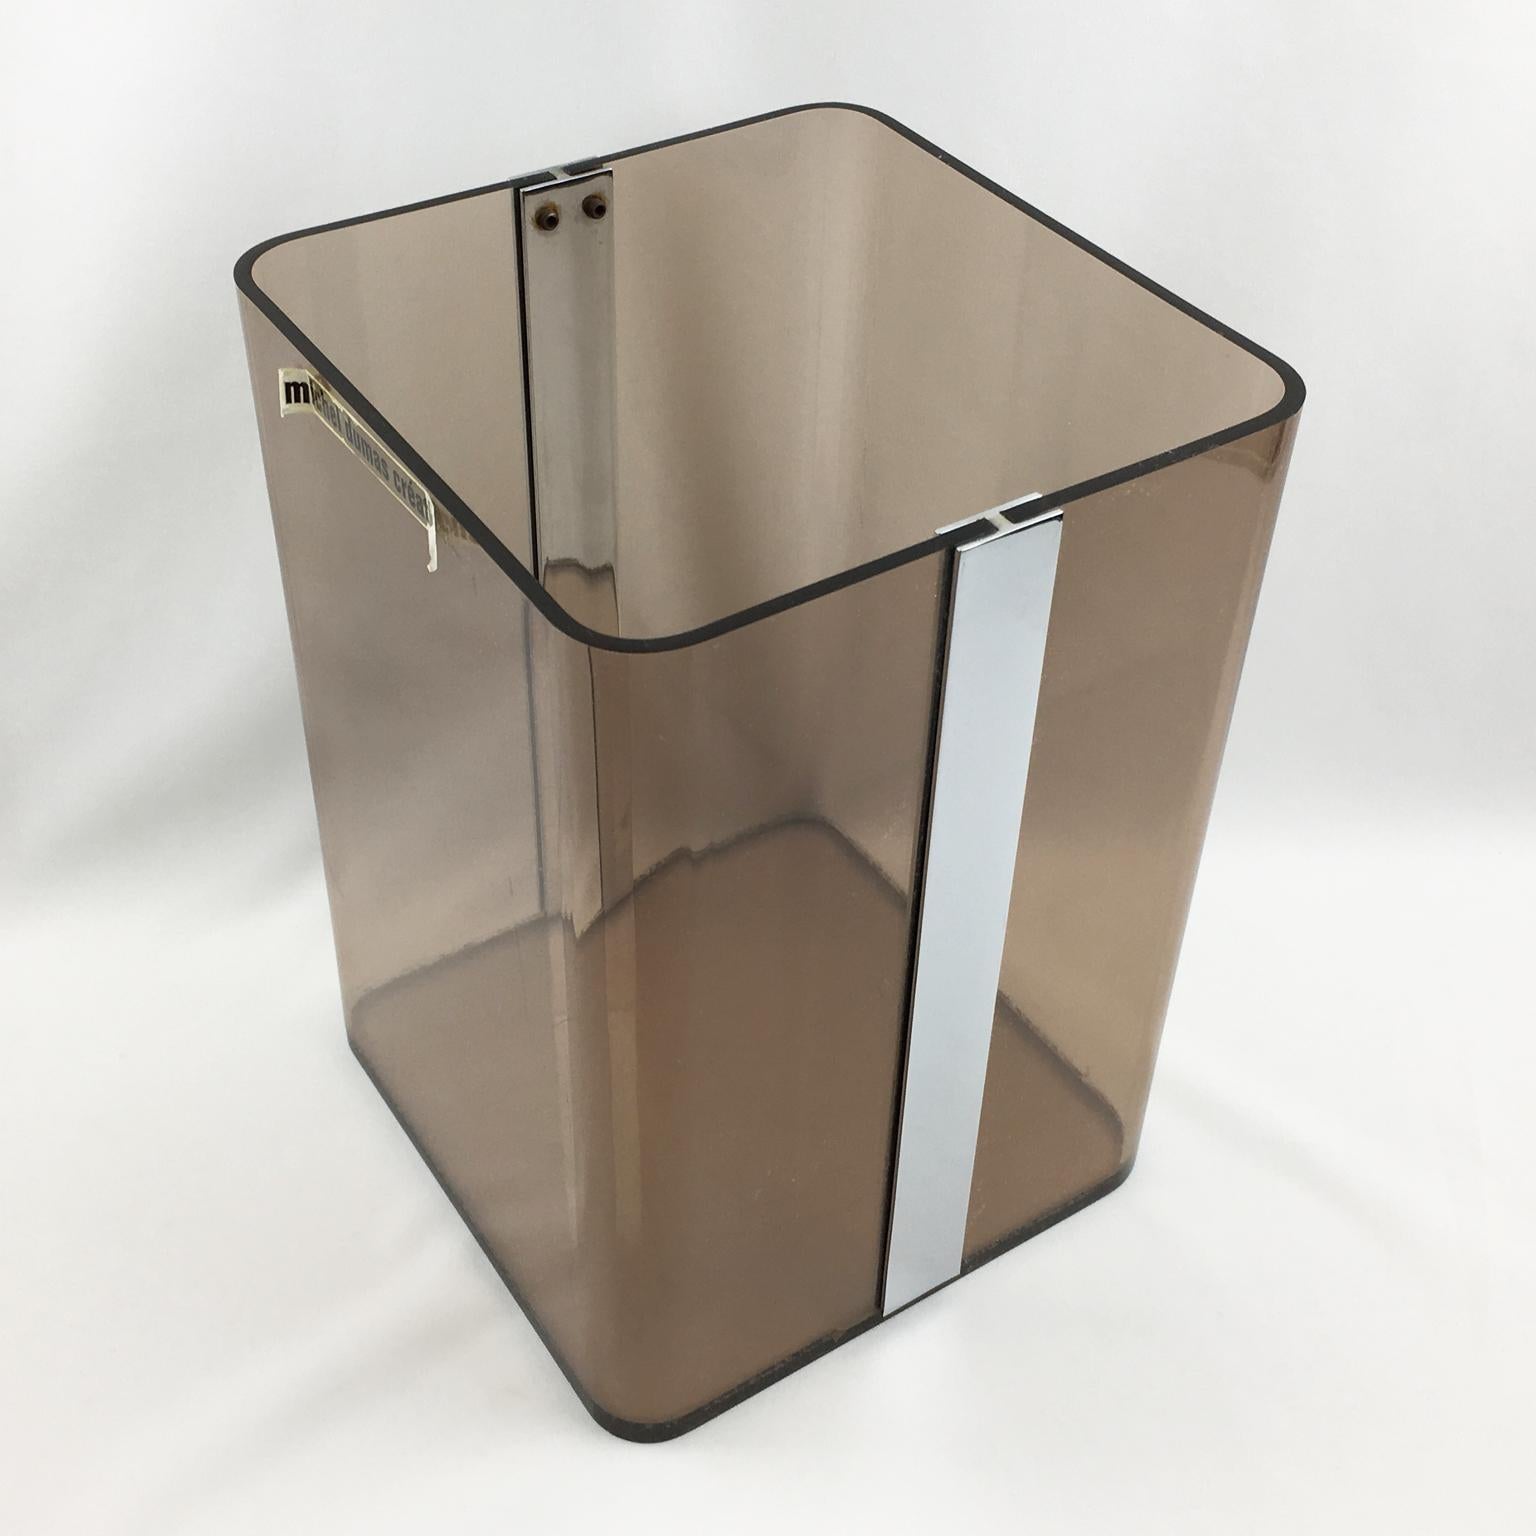 Late 20th Century Michel Dumas for Roche Bobois 1970s Smoked Lucite and Chrome Paper Waste Basket